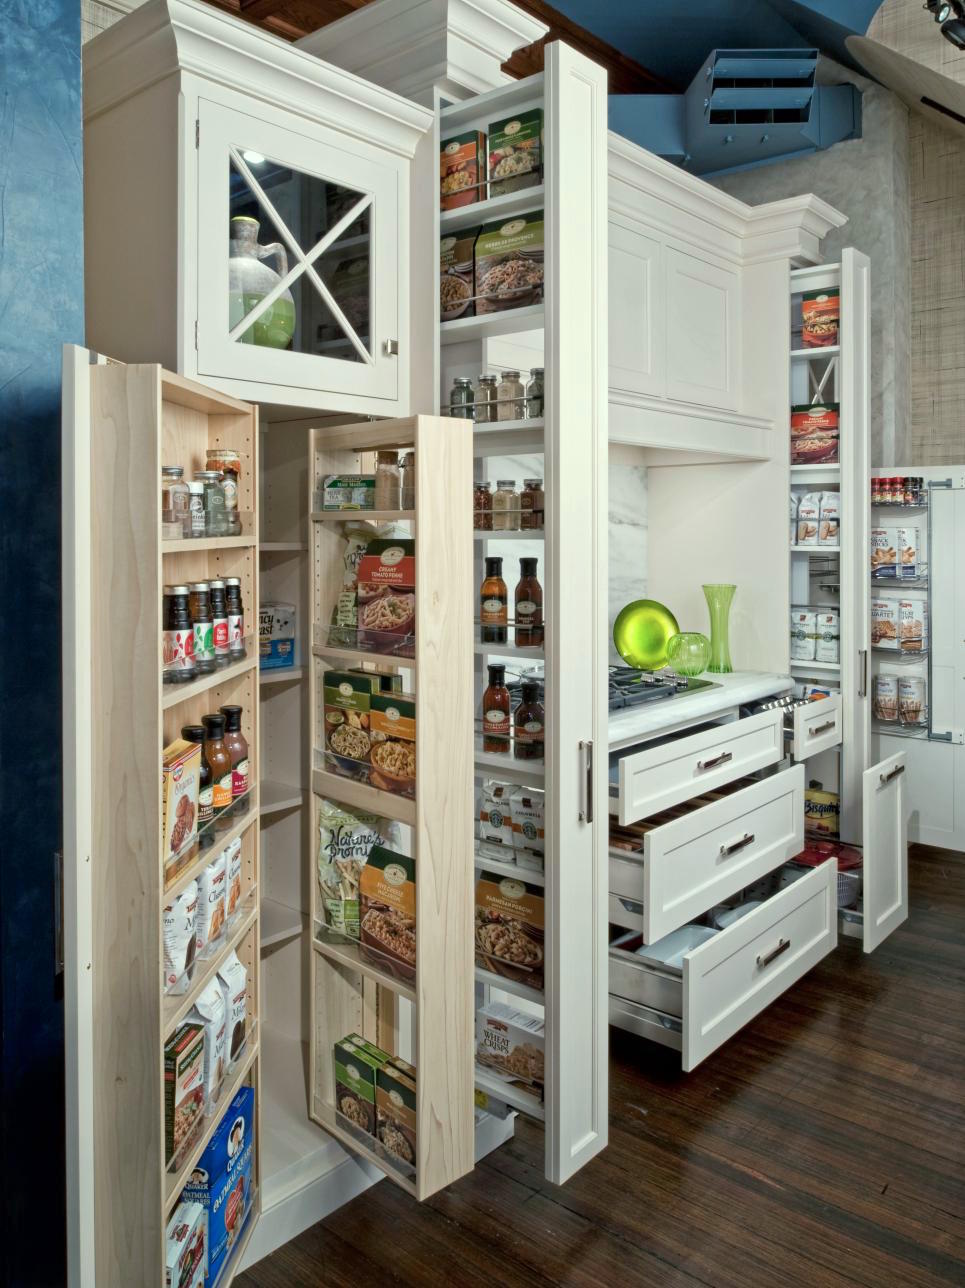 stephen-rossi-photo-Kitchen-Pantry-Cabinets_s3x4.jpg.rend.hgtvcom.966.1288